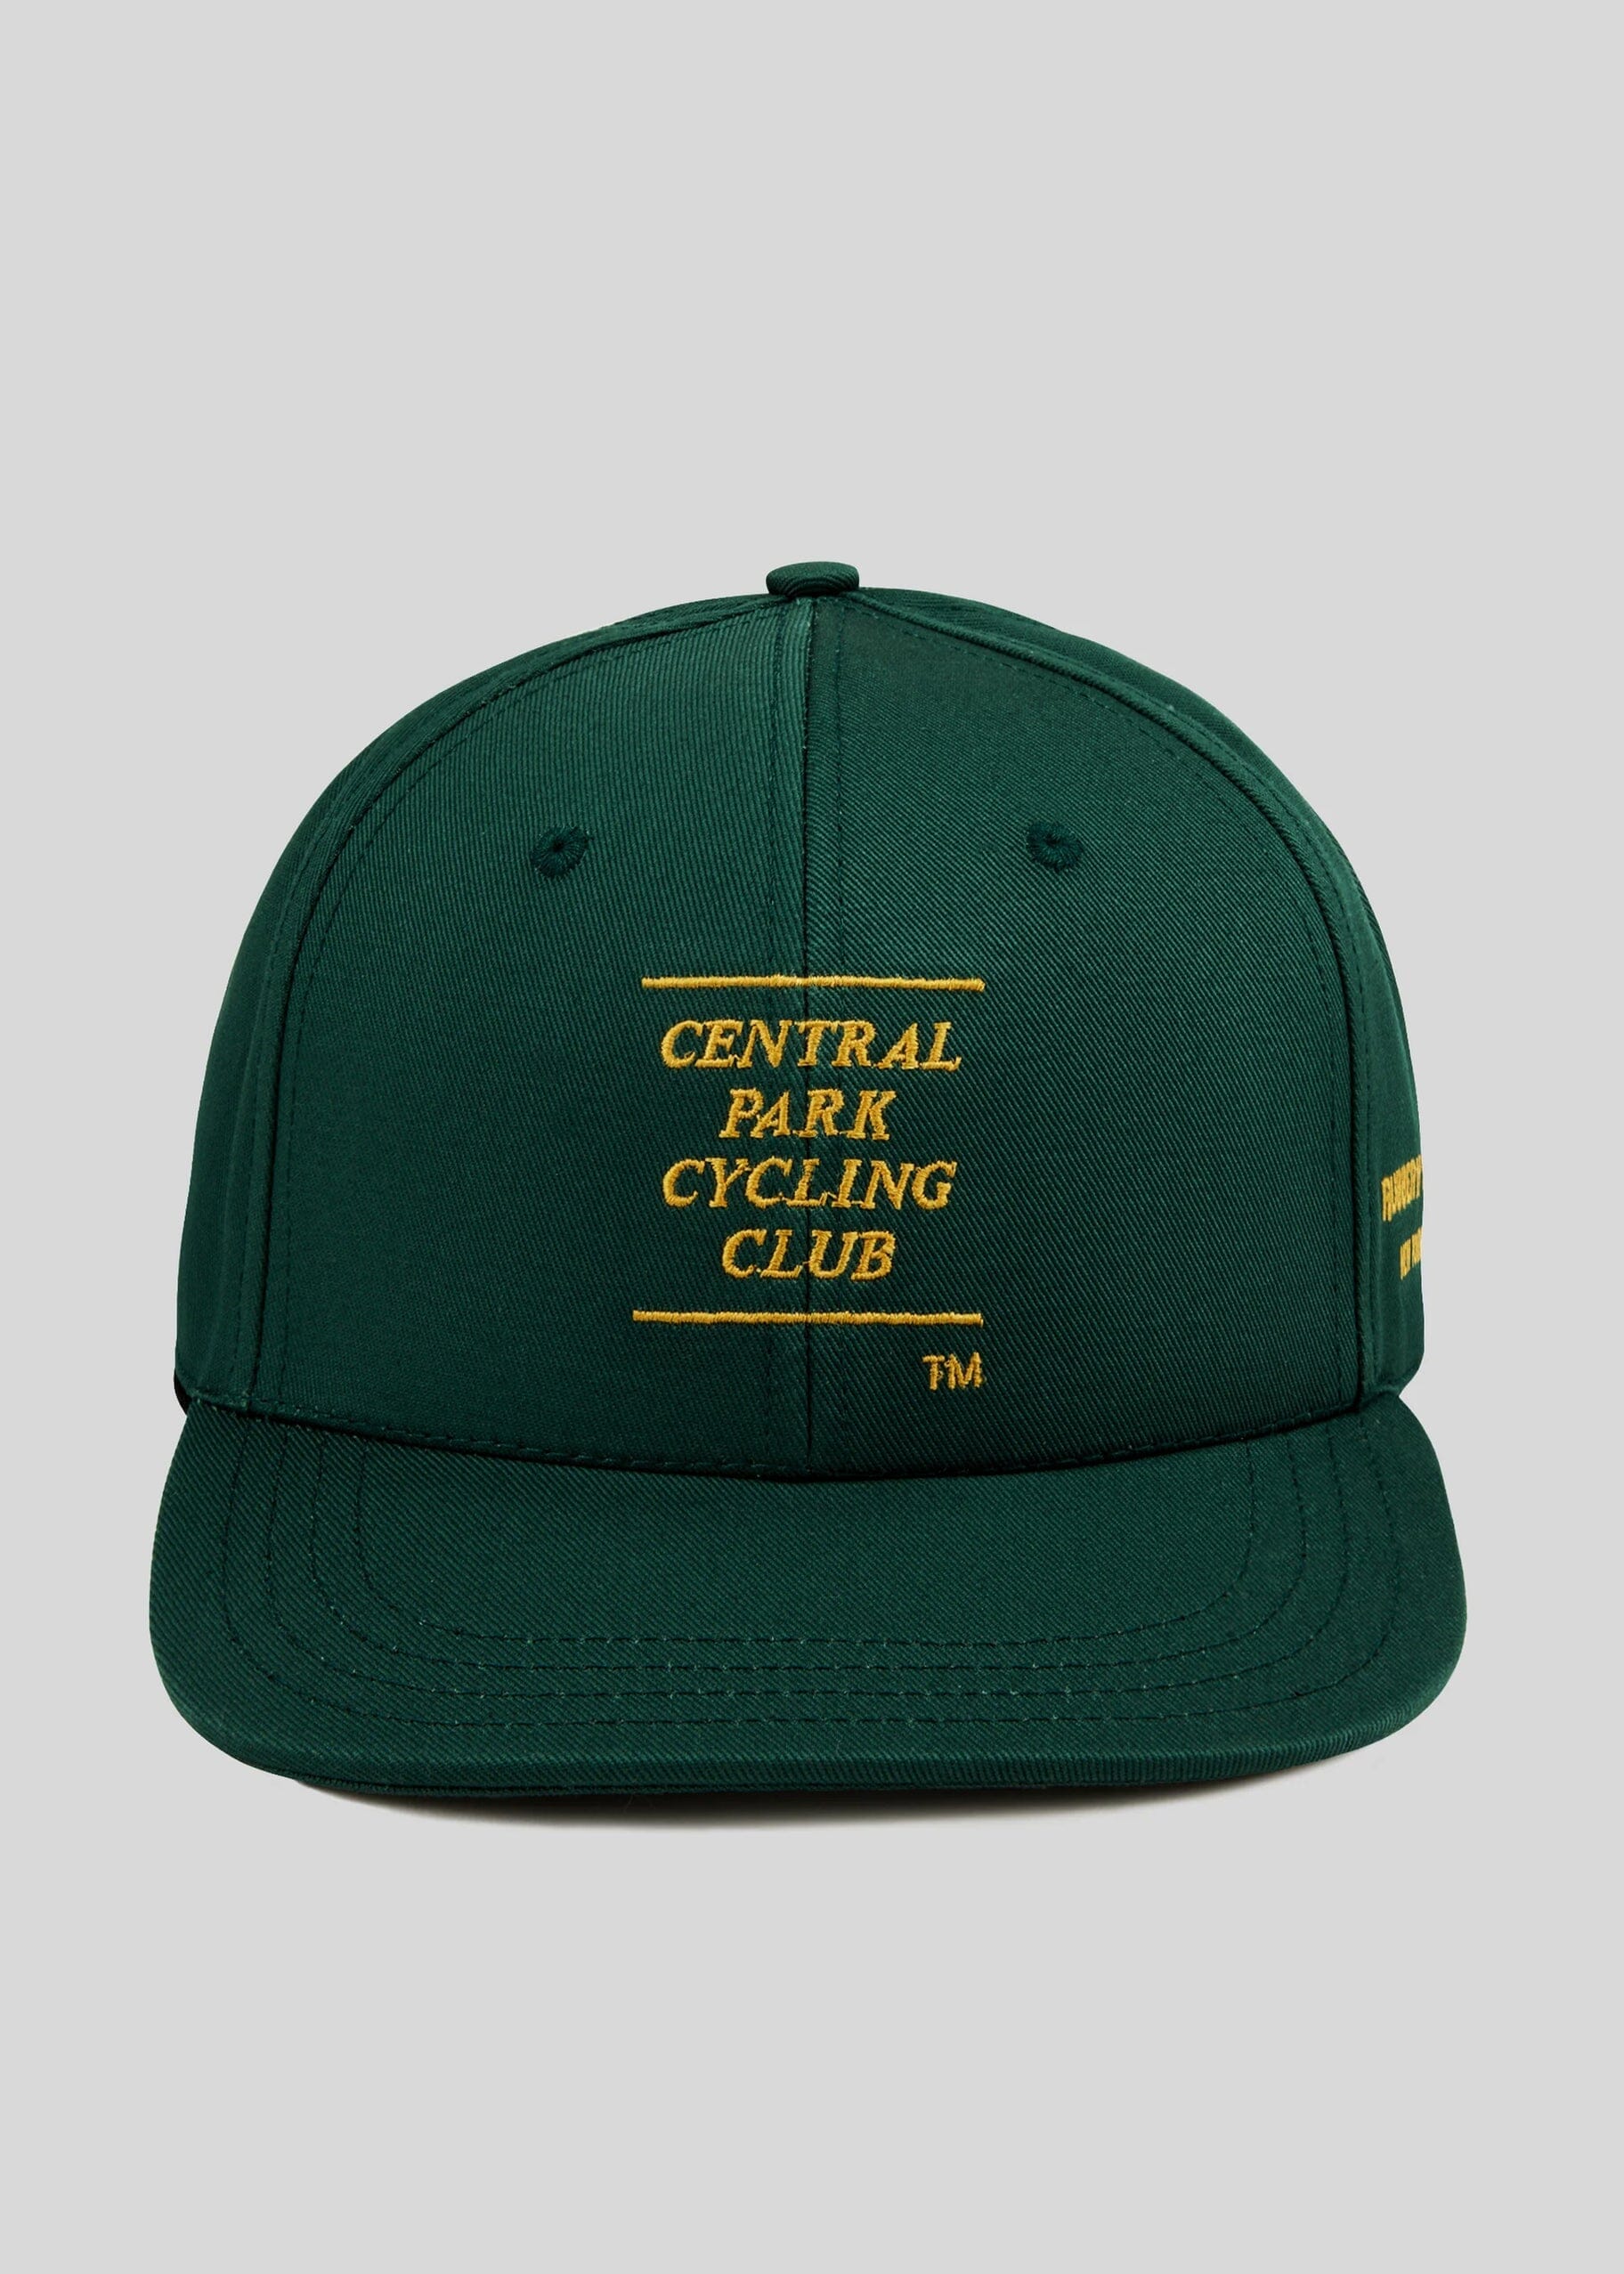 Rubber N' Road - Casquette Central Park Cycling Club Casquettes Casual Rubber N' Road 